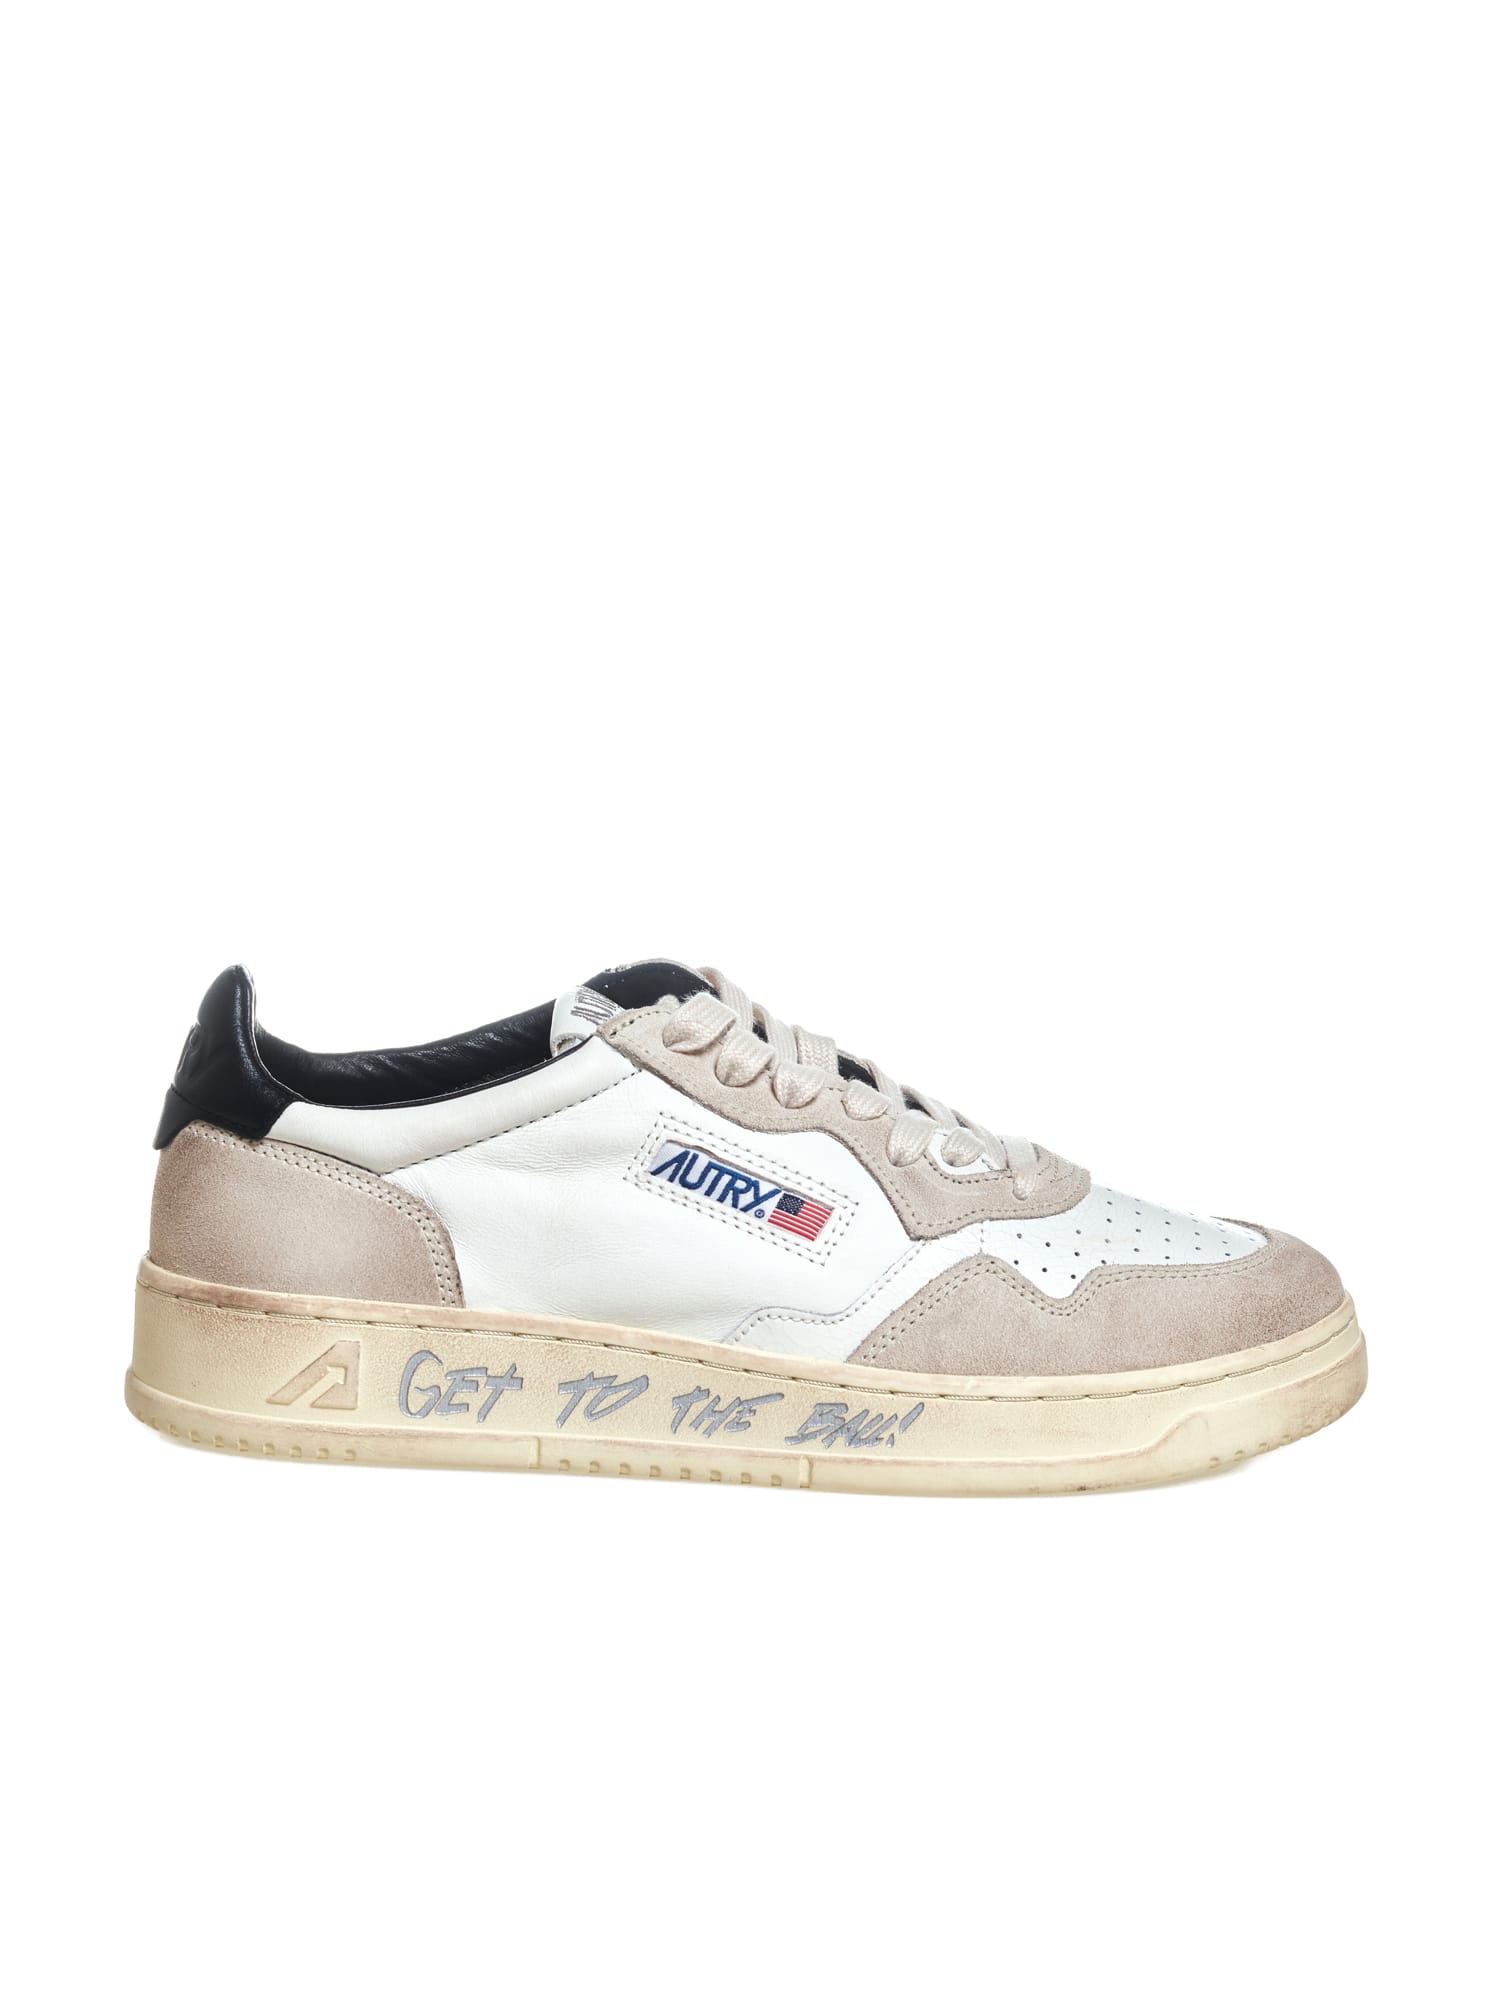 Autry 01 Low Man Leat Drae In White Silver